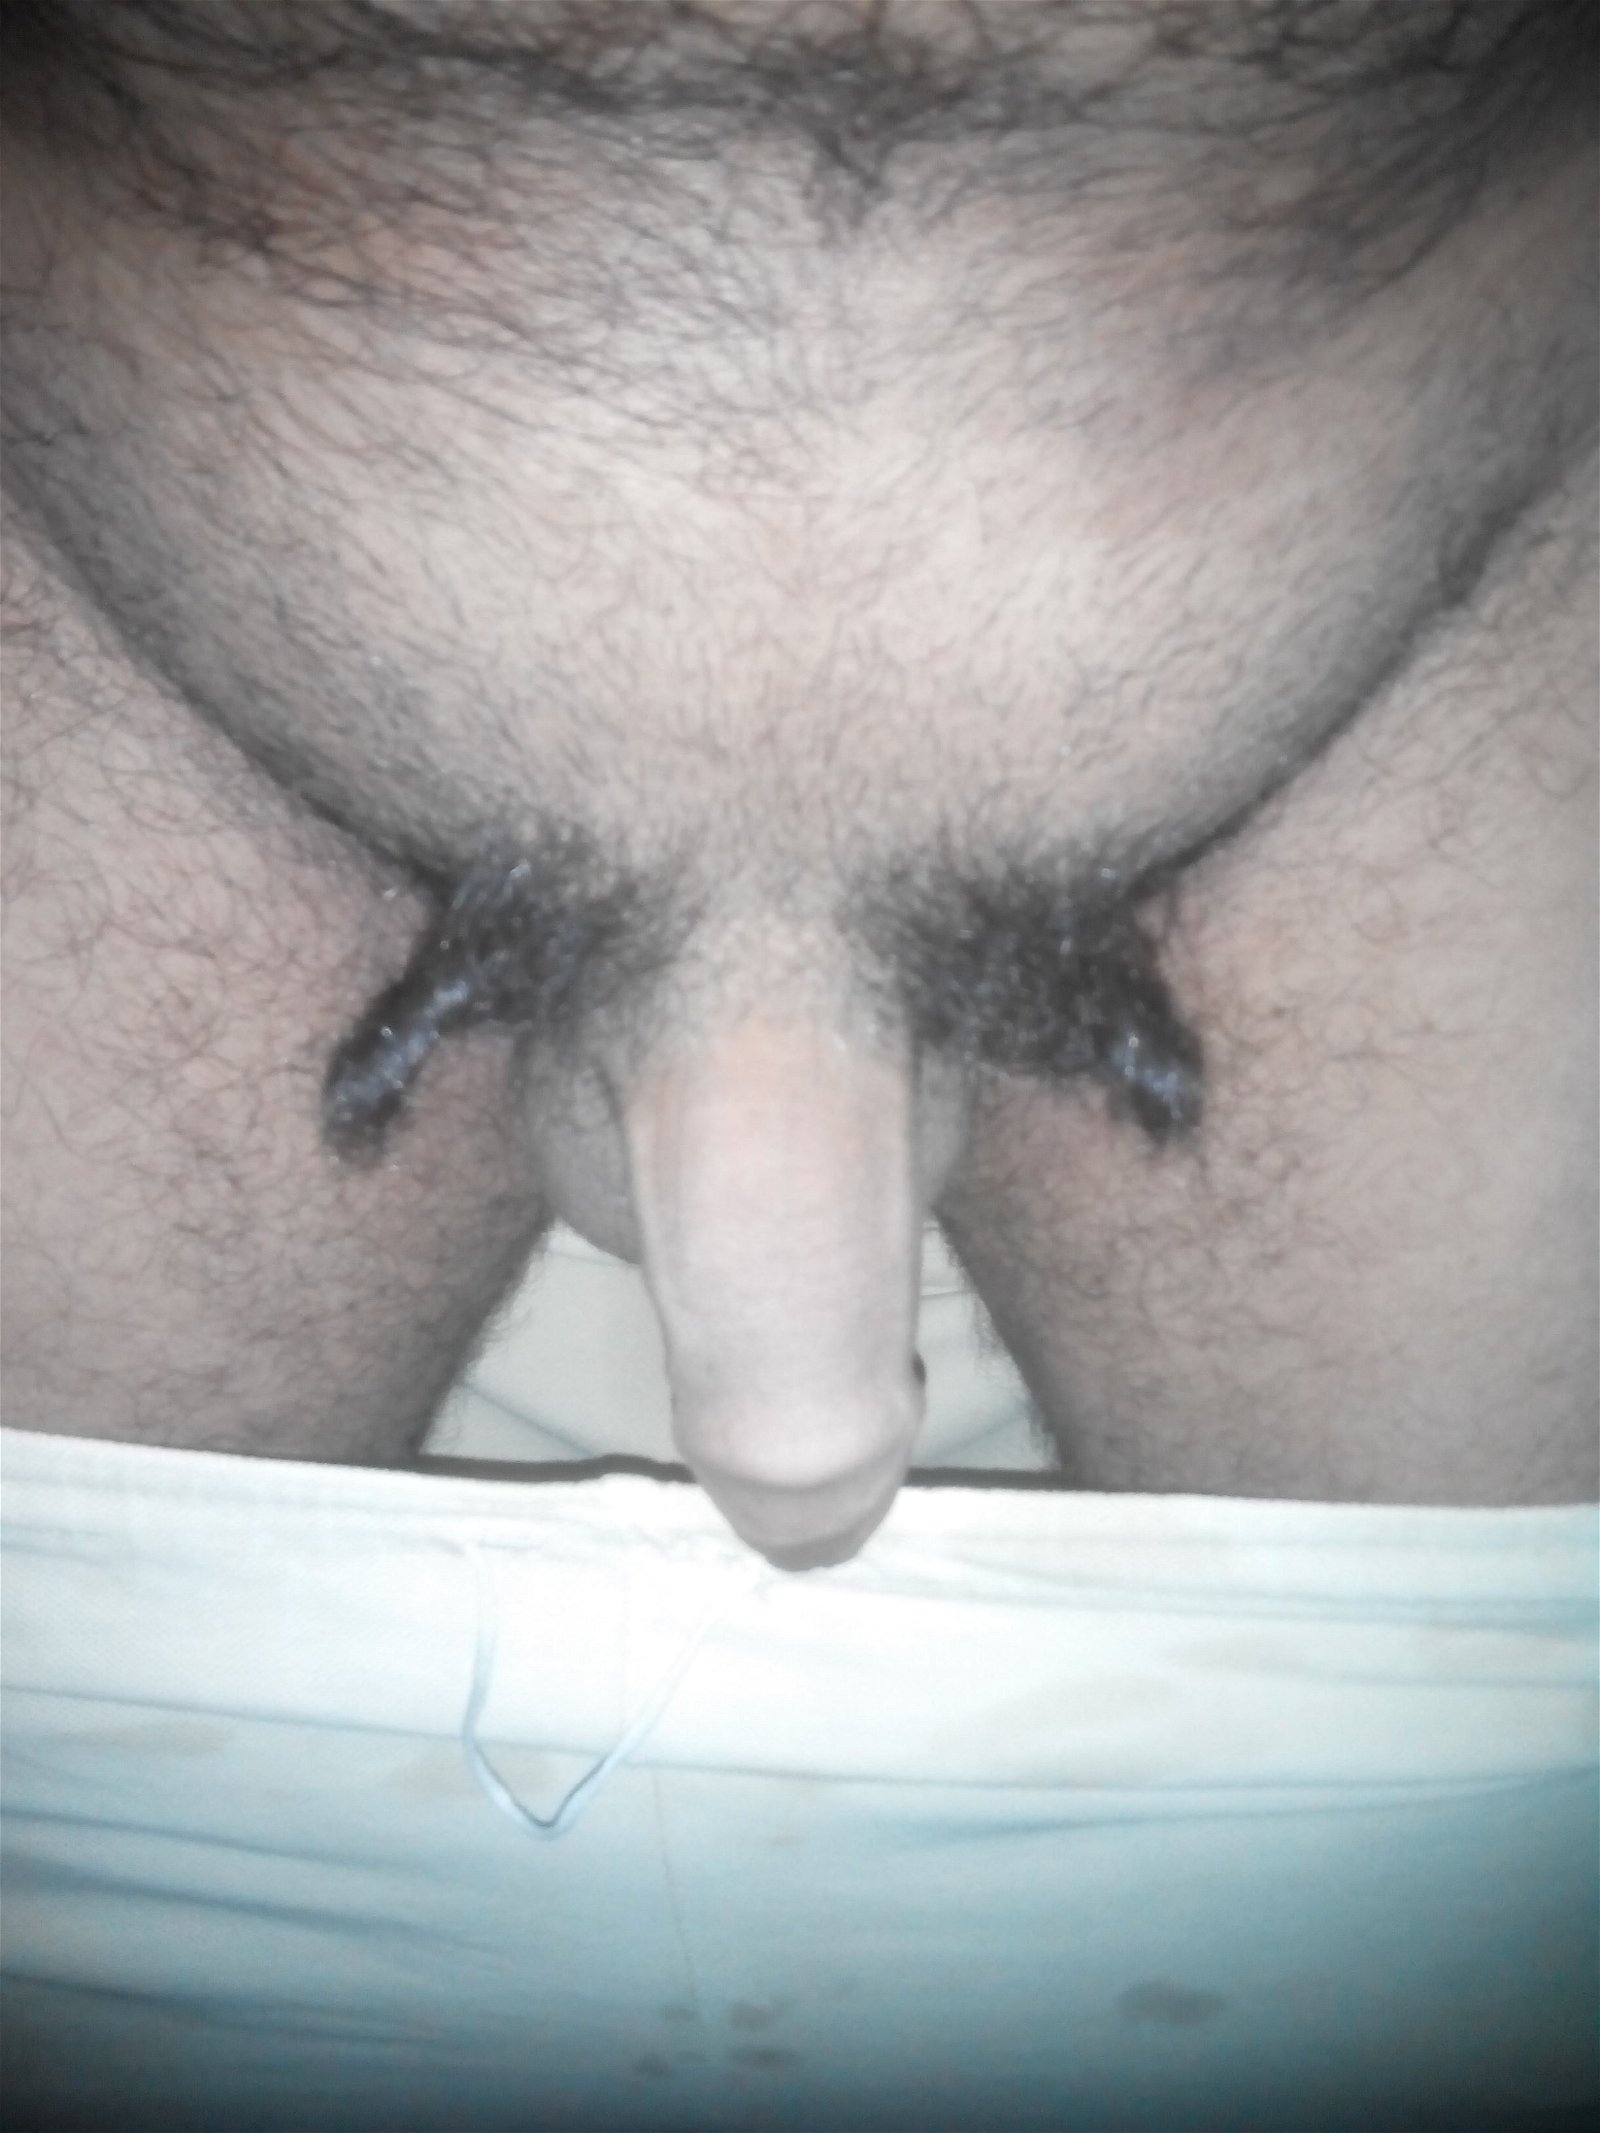 Watch the Photo by Pussy Hunter with the username @raj1040, posted on February 15, 2020. The post is about the topic Hairy Penis.